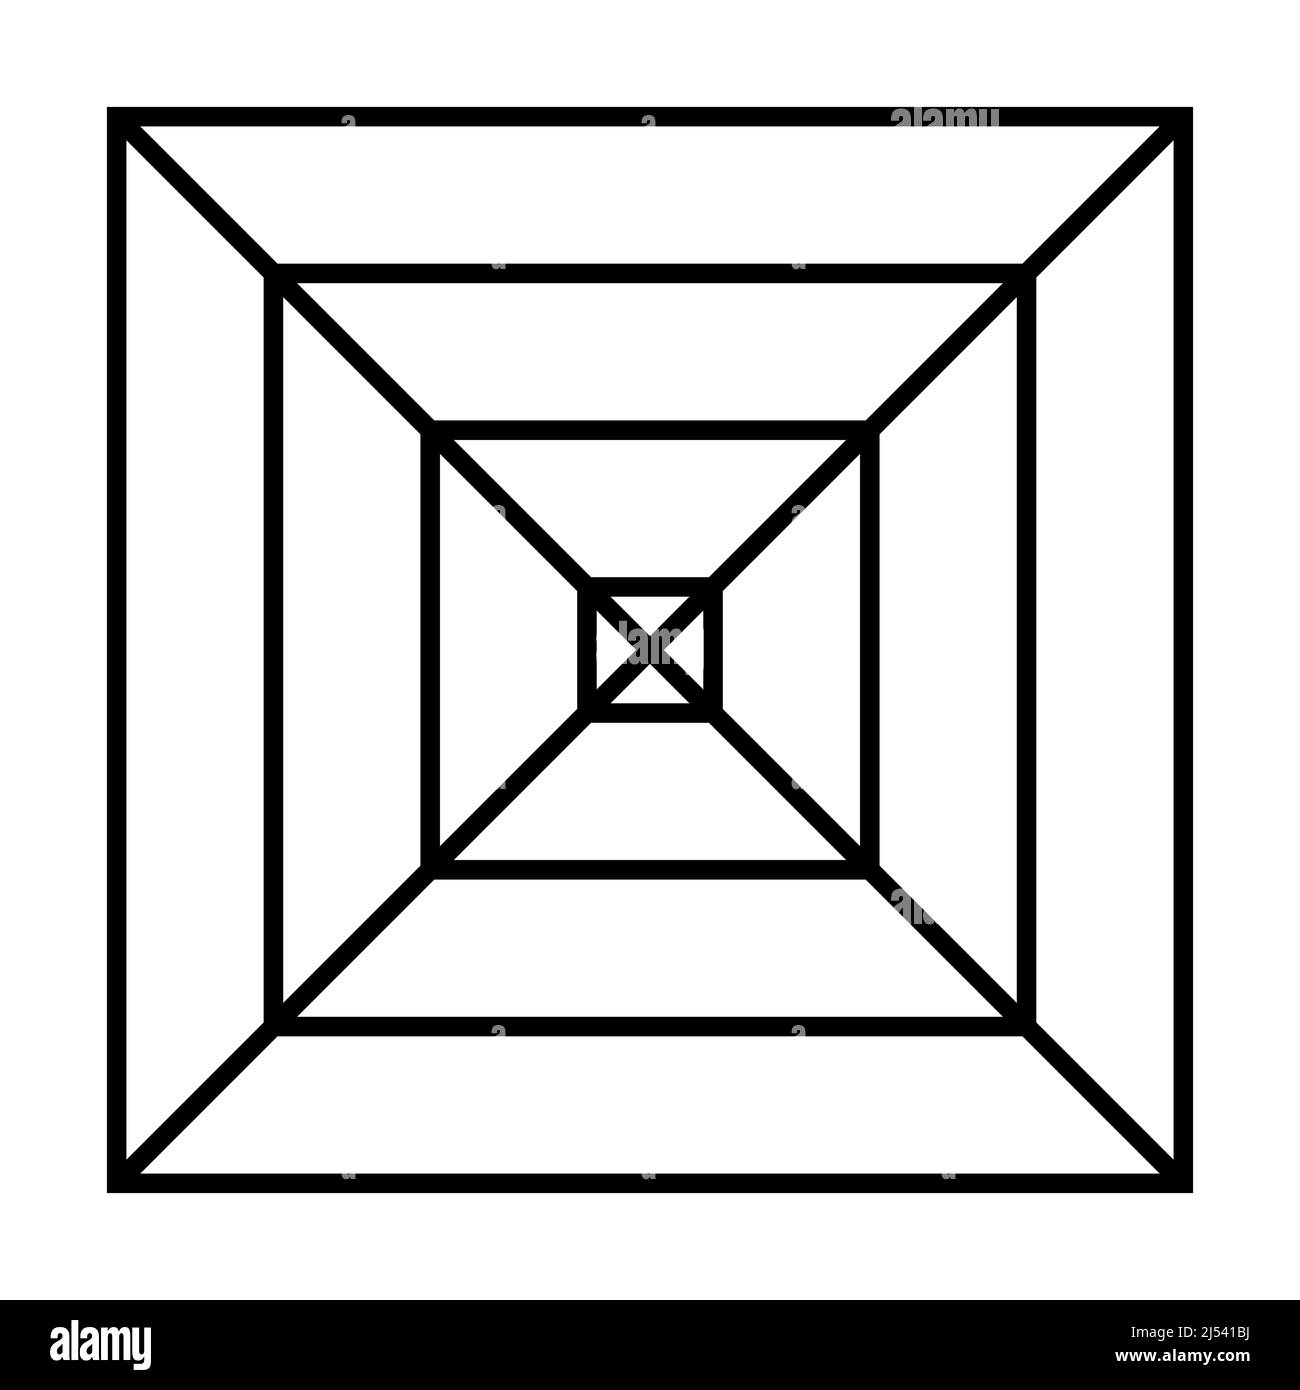 Radar square quad chart spider, radar chart template with empty square 4S Stock Vector